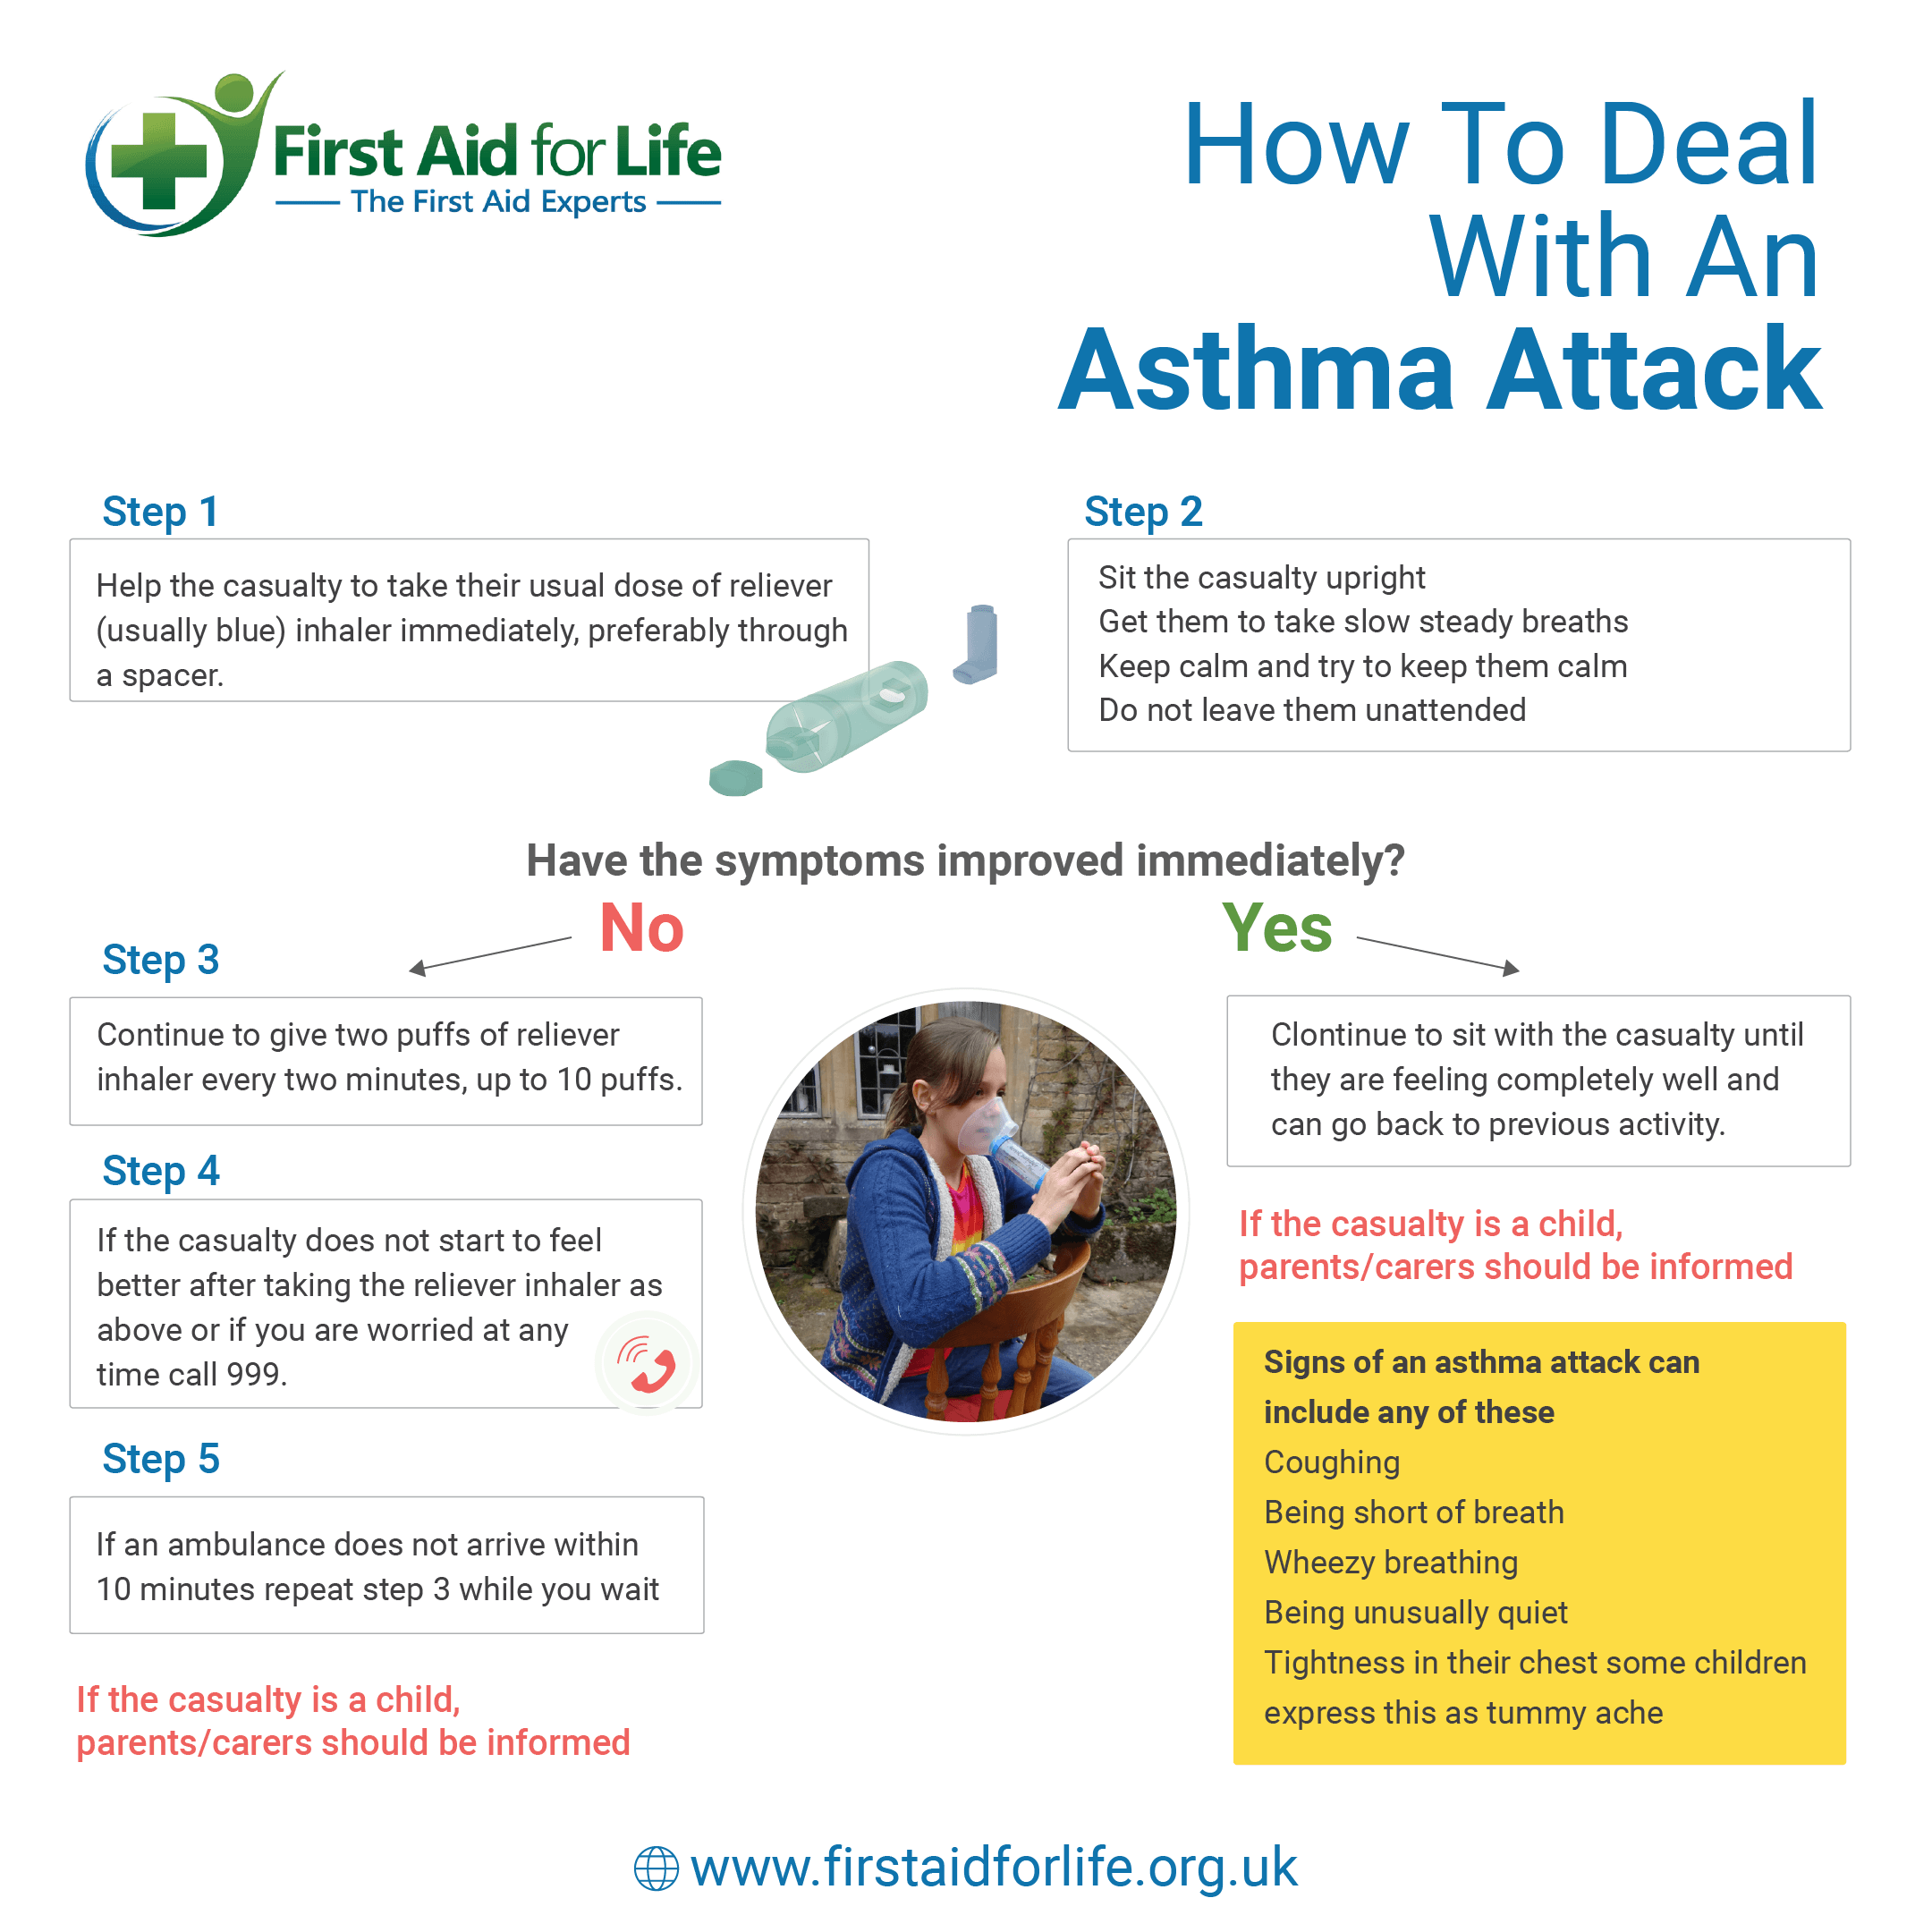 How to help in an asthma attack